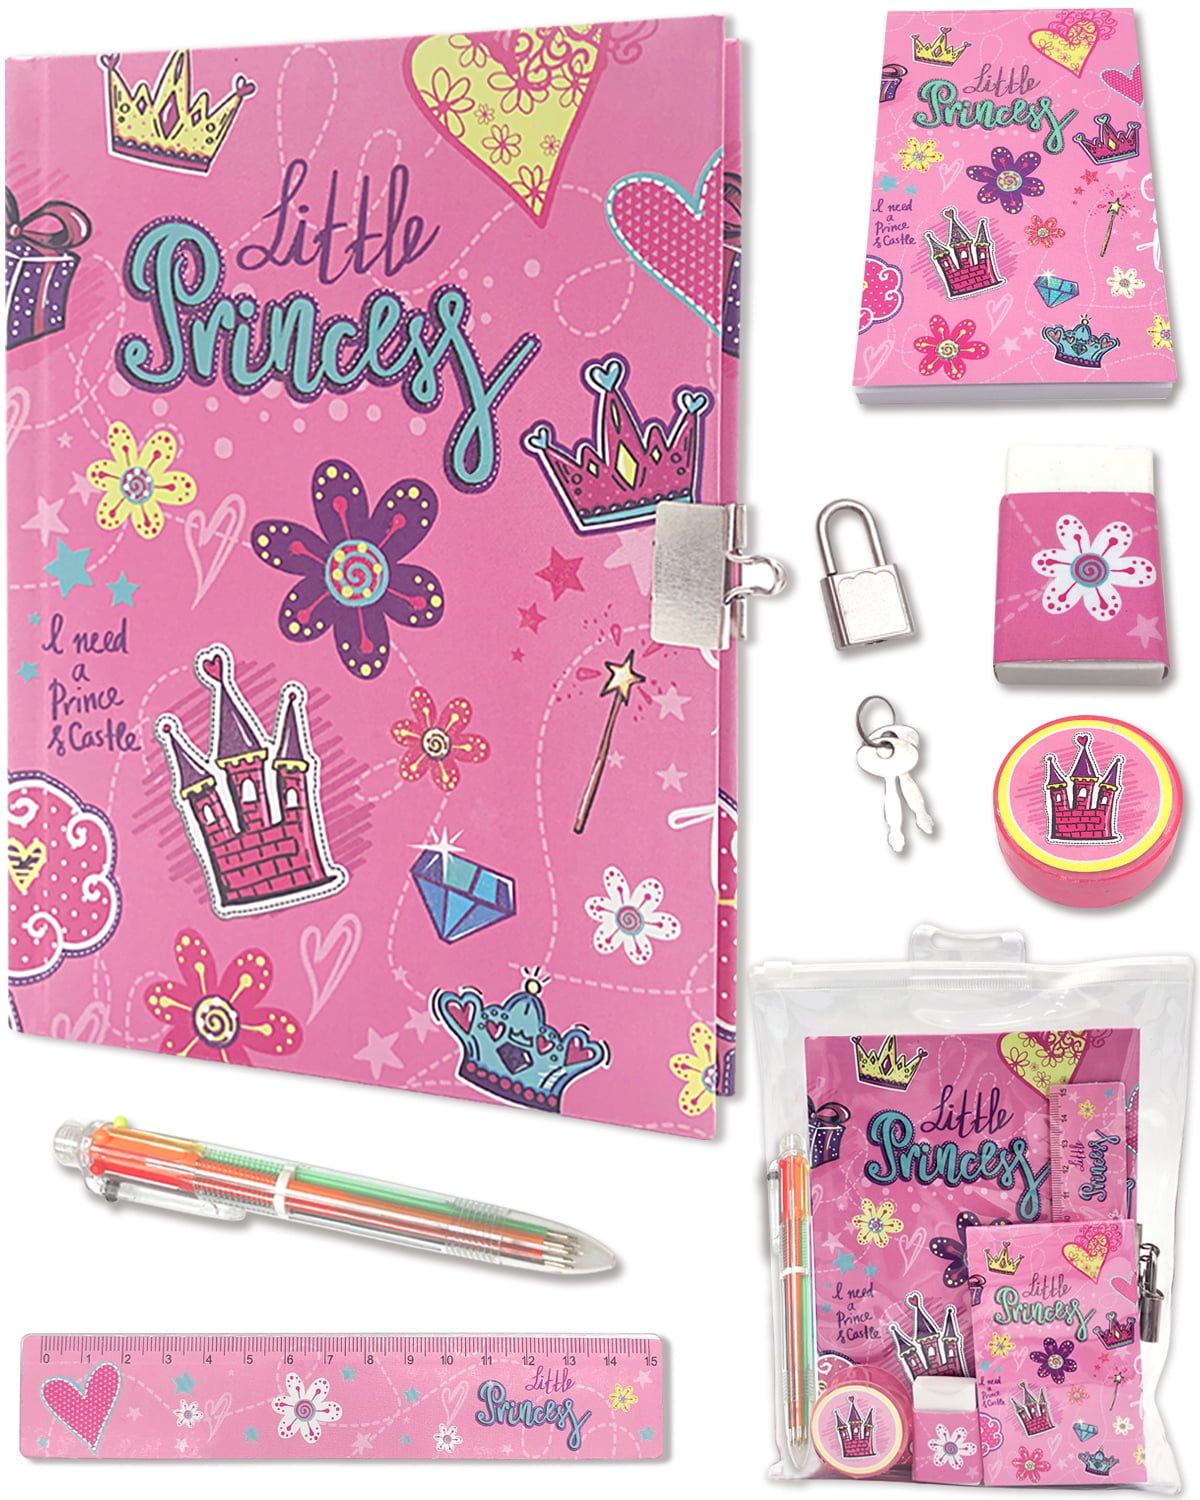 GINMLYDA Girls Diary With Lock, Kids Journal Stationary Set For Pre School  Teen Learning Writing Drawing Age 6,8,10,12 Years Princess Gif